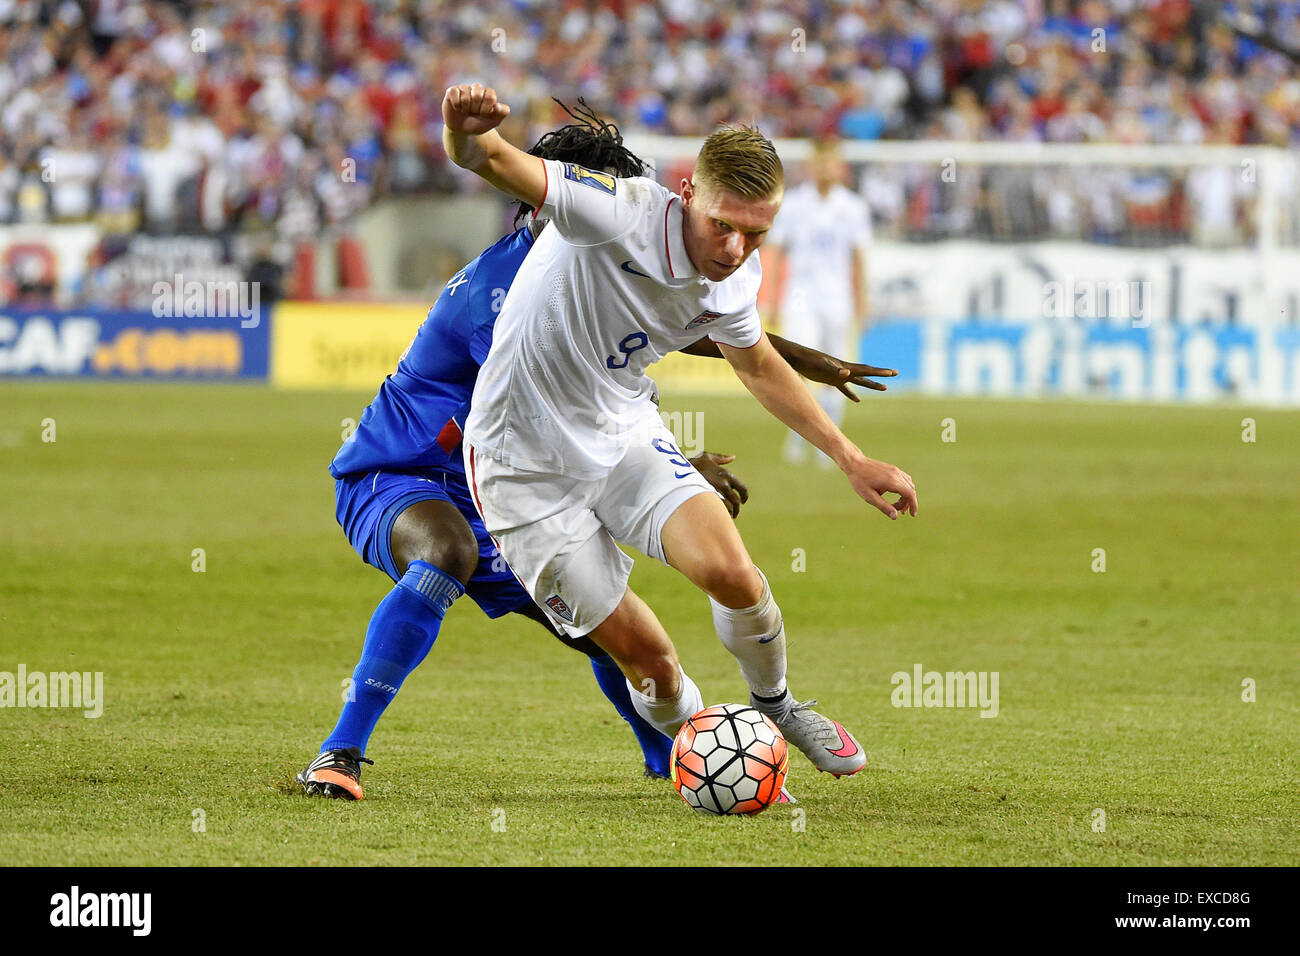 Foxborough, Massachusetts, USA. 10th July, 2015. United States forward Aron Johannsson (9) keeps the ball from Haiti defender Reginald Goreux (8) during the CONCACAF Gold Cup group stage match between USA and Haiti held at Gillette Stadium, in Foxborough Massachusetts. USA defeated Haiti 1-0. Eric Canha/CSM/Alamy Live News Stock Photo